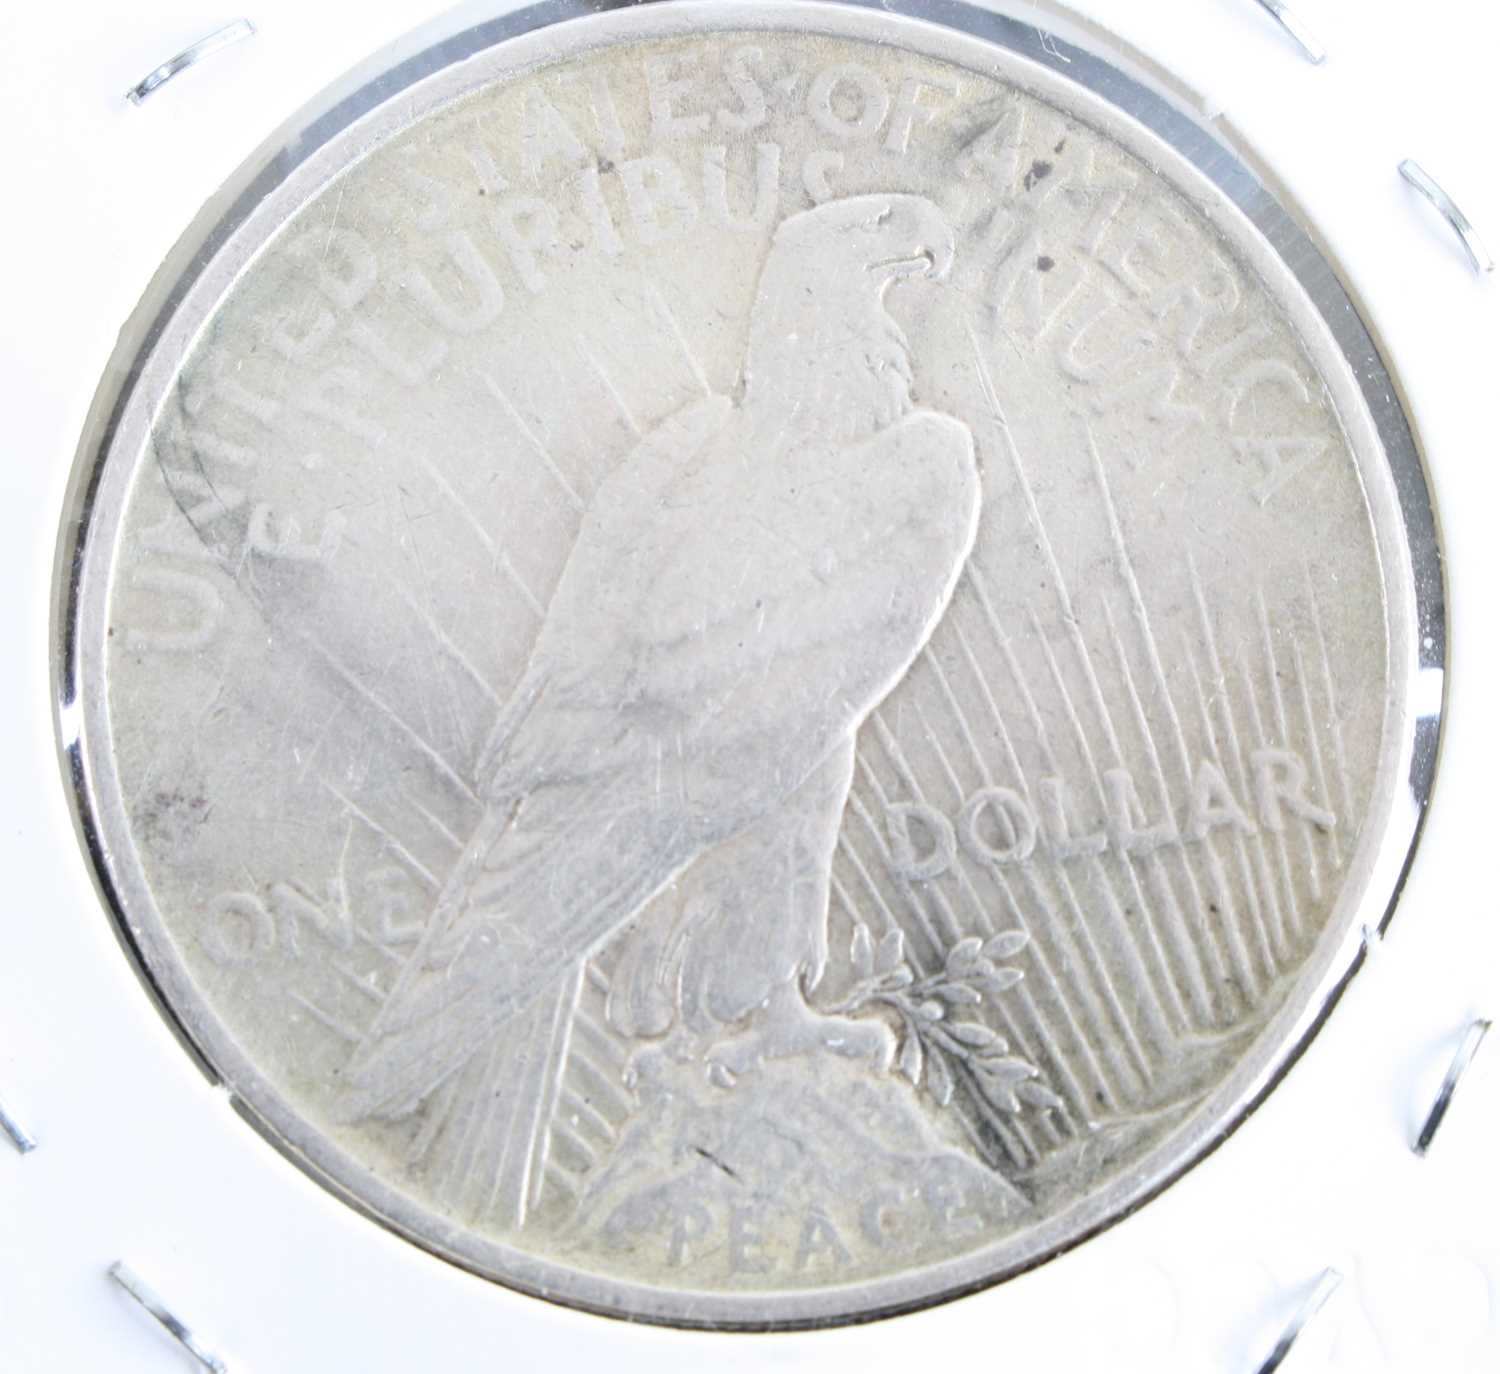 United States of America, 1922 Peace dollar, obv: Liberty bust left above date, rev: eagle - Image 2 of 4